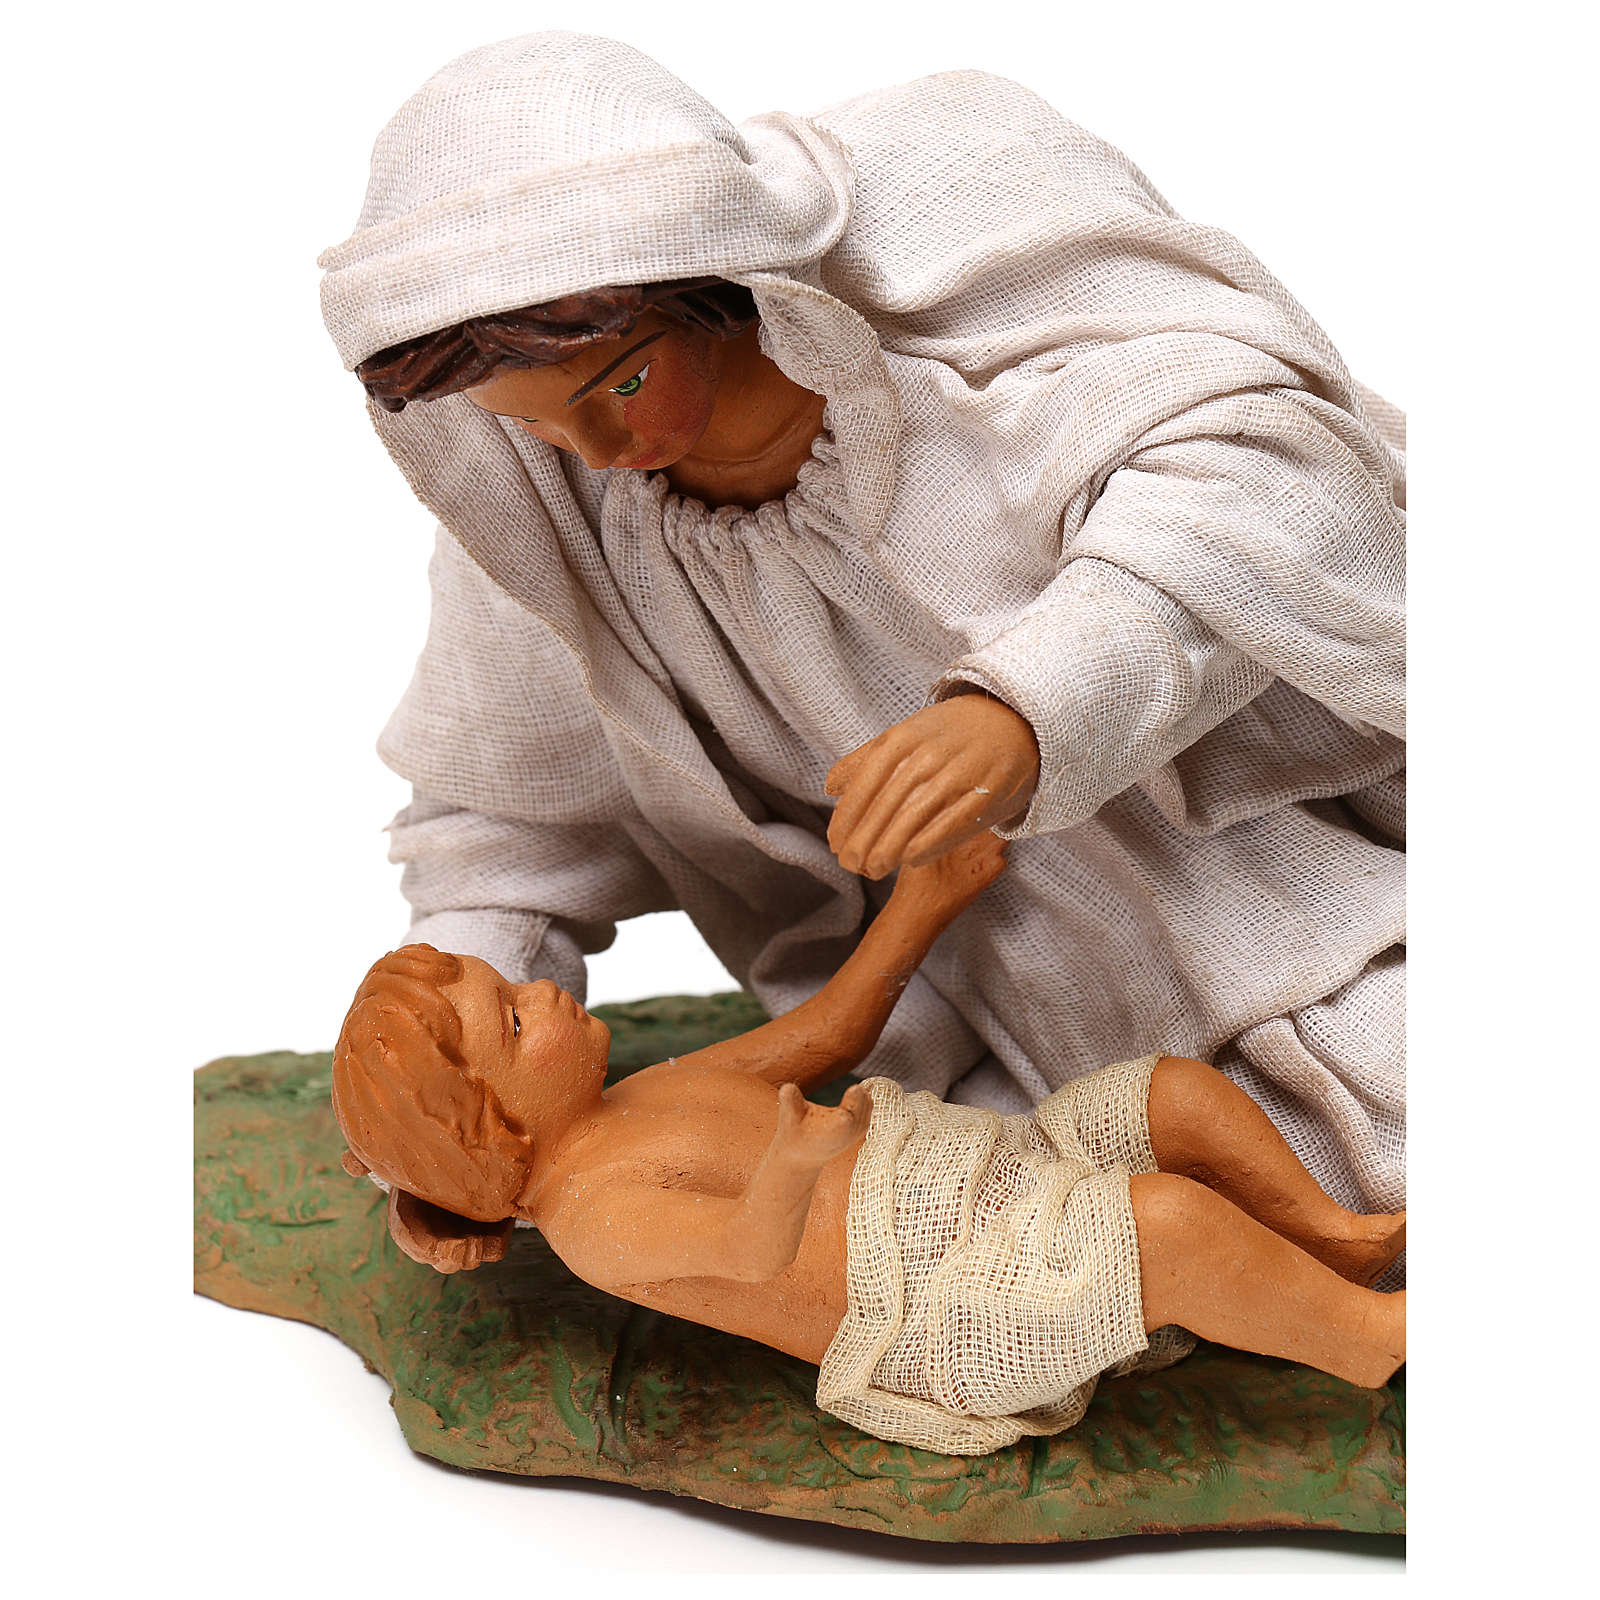 Nativity Set Accessory Mary Resting With Baby 24 Cm Figurine